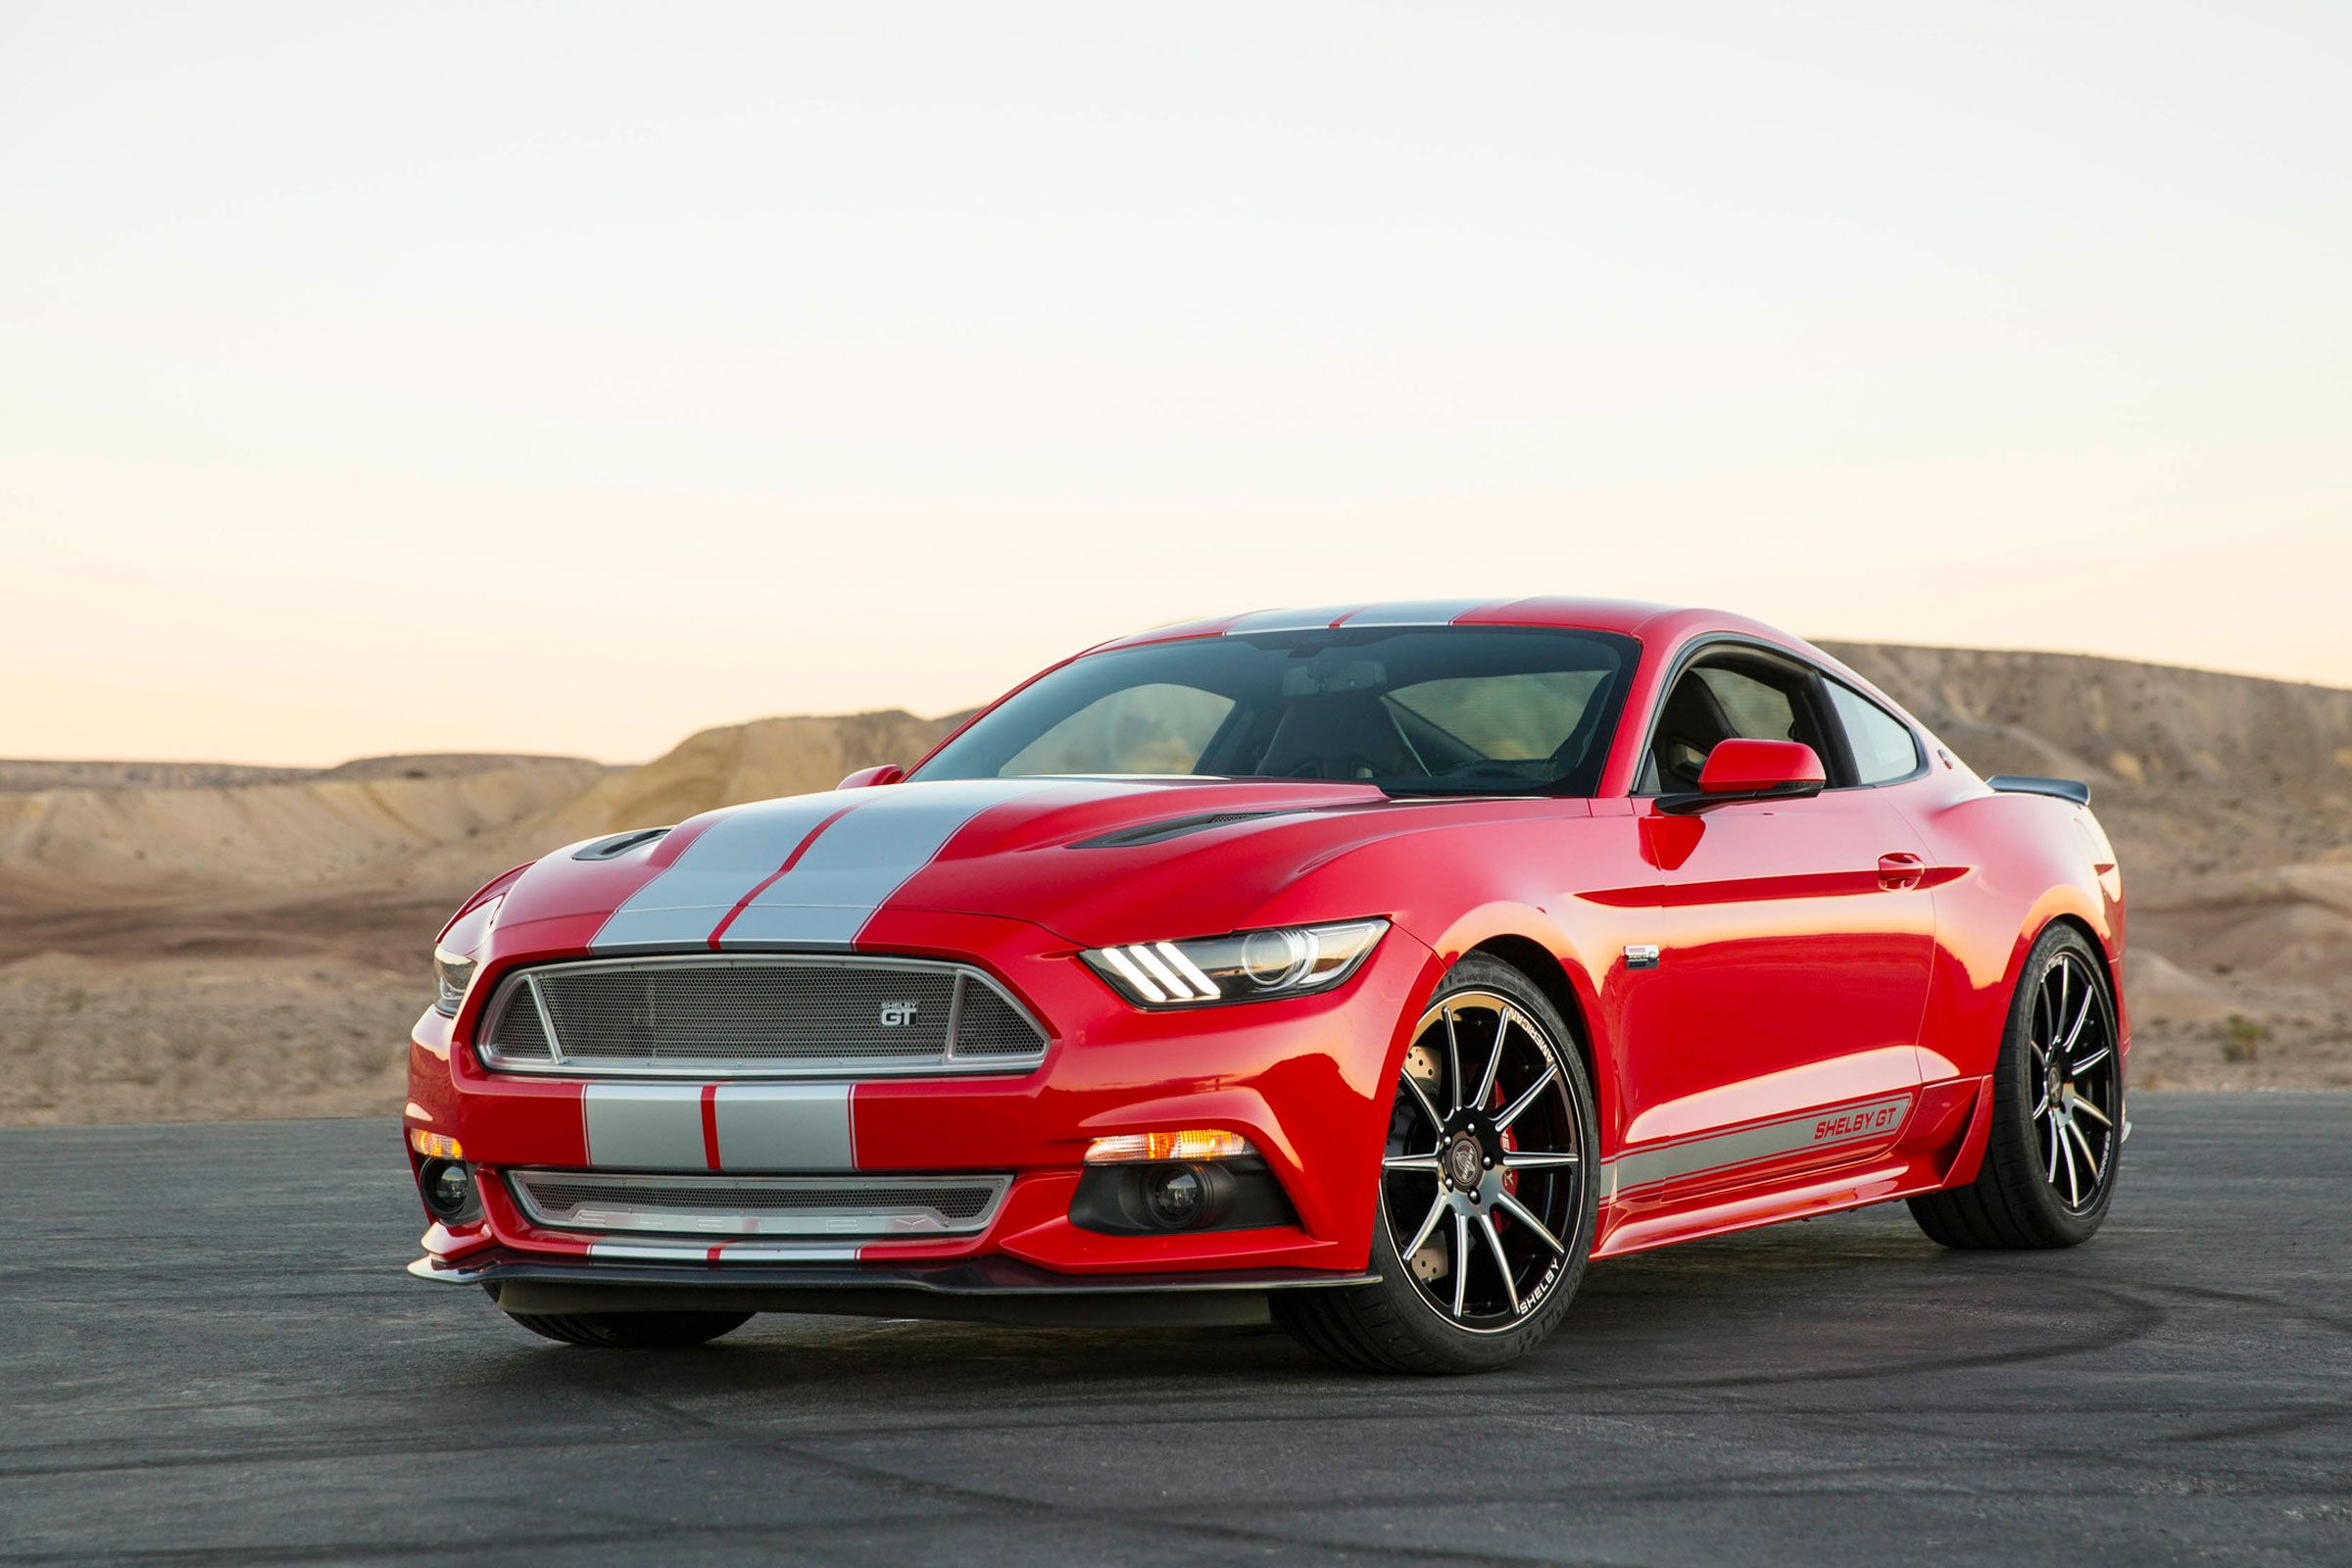 2015 Ford Mustang Shelby GT350 red